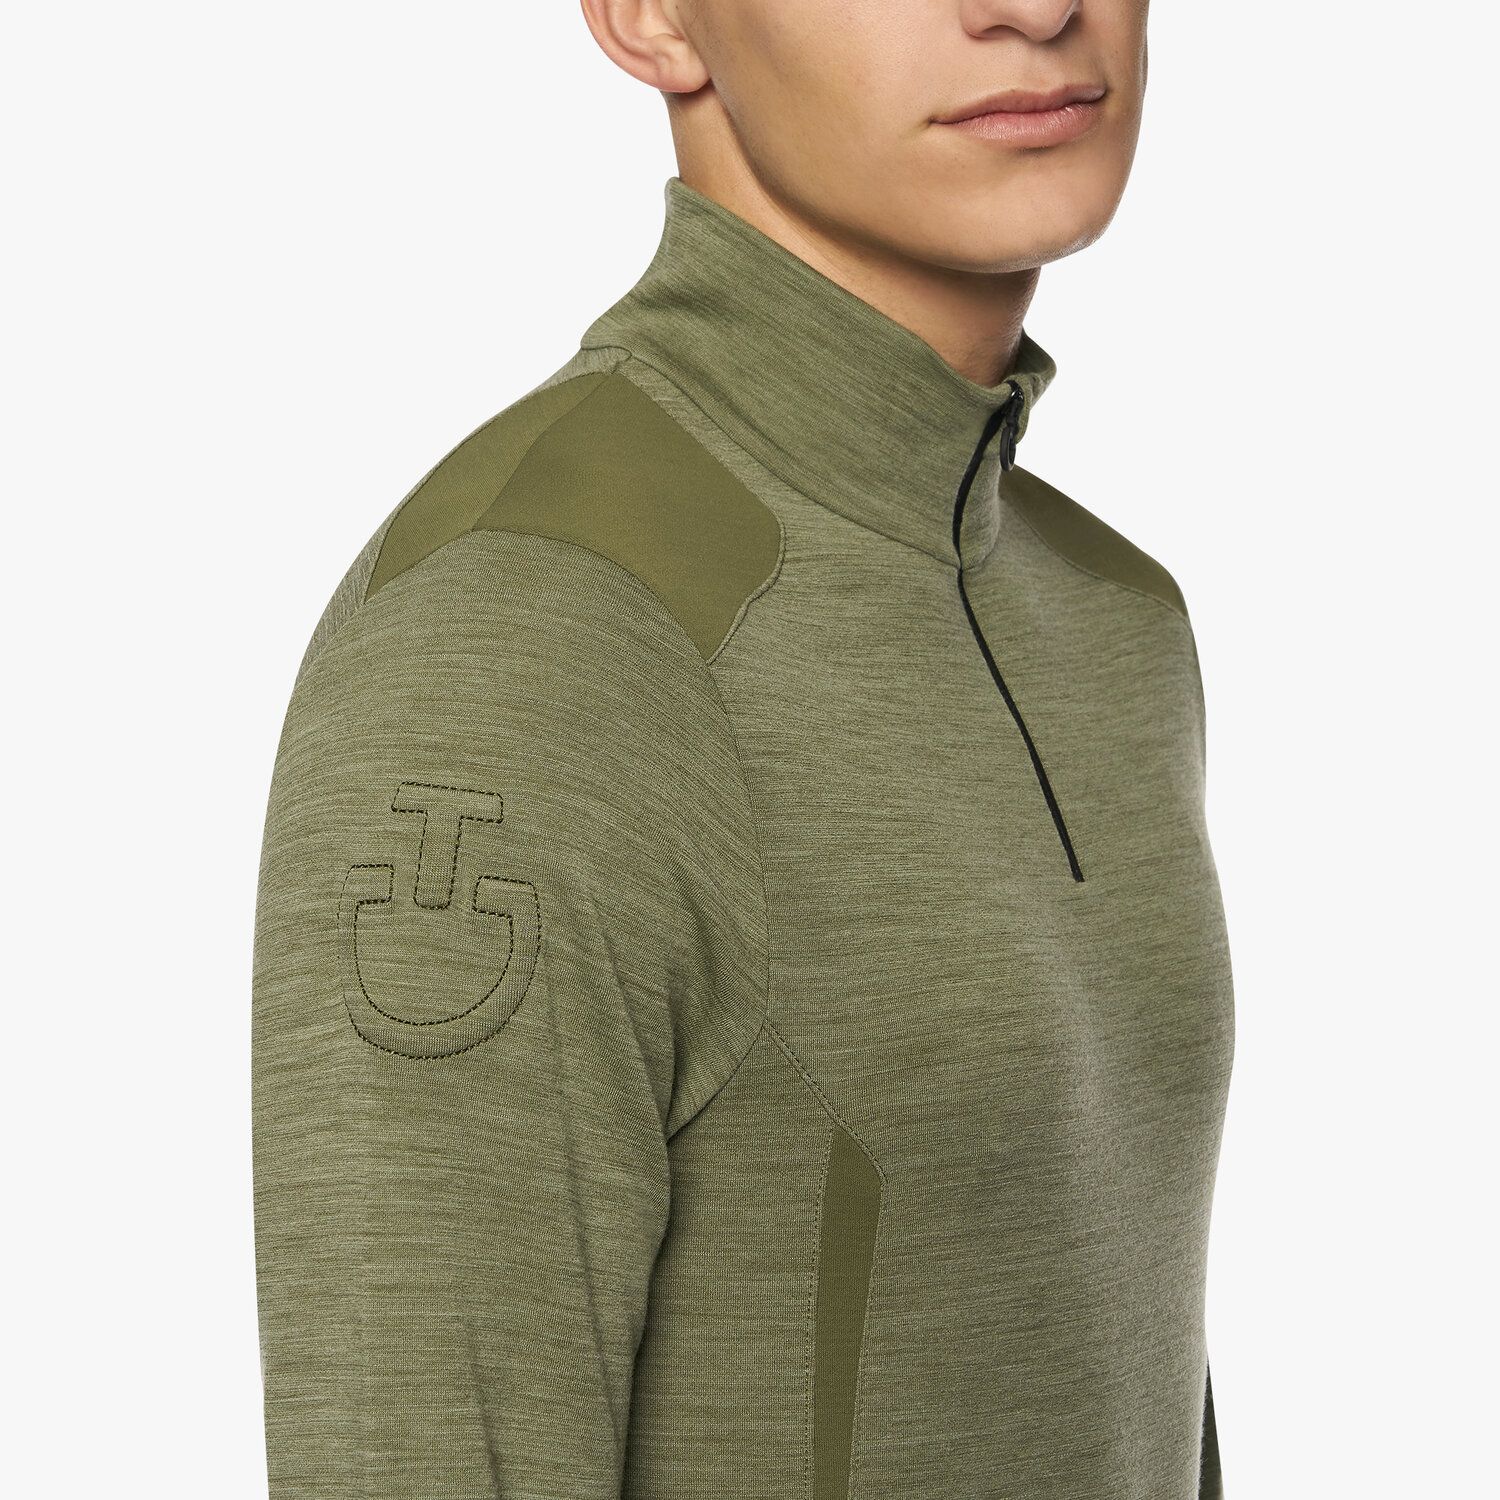 Cavalleria Toscana Men’s performance wool base layer with a quarter zip FOLIAGE GREEN-5